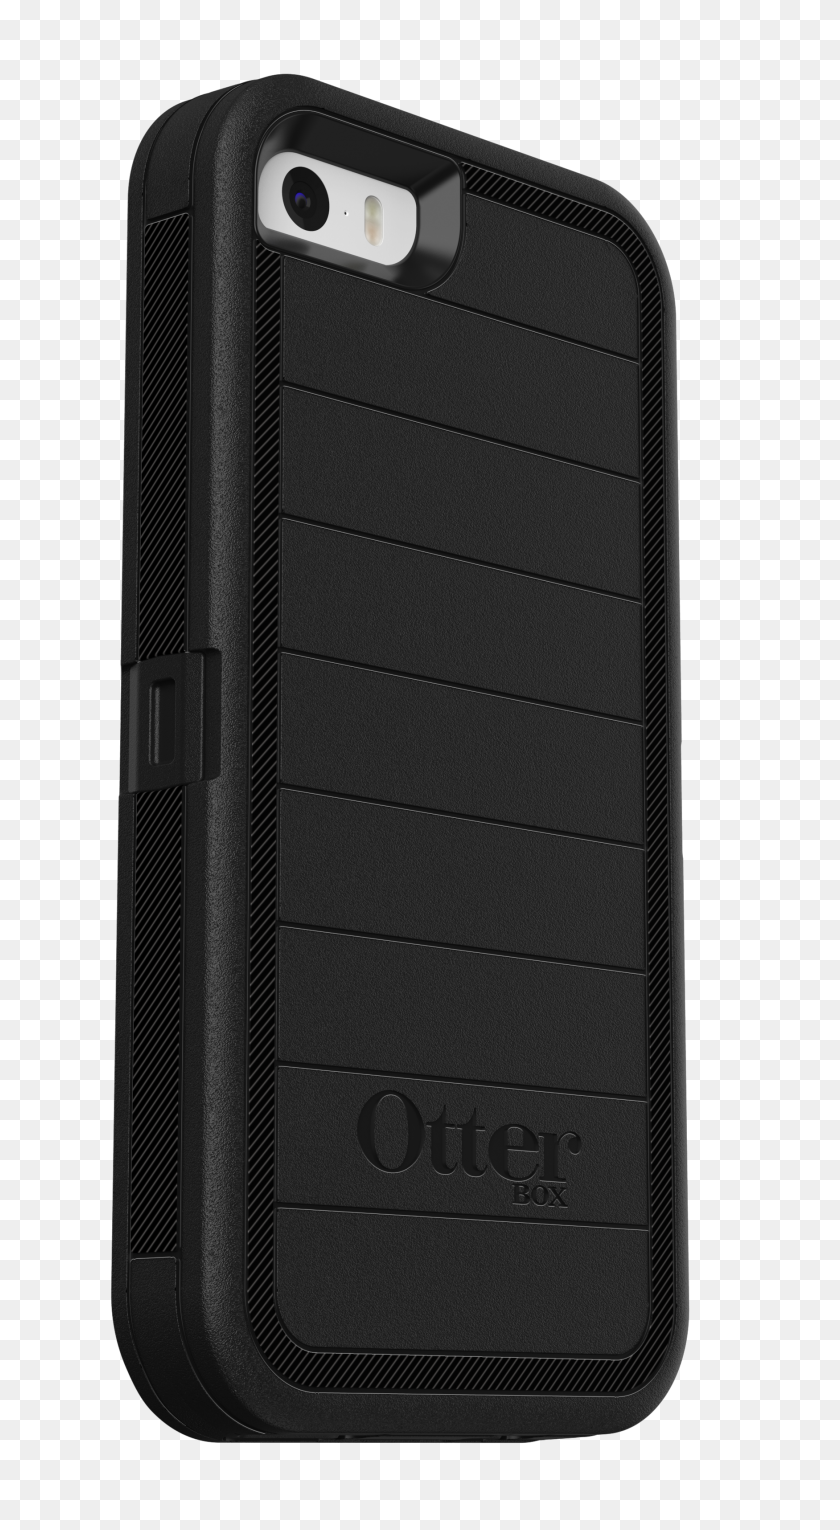 1750x3300 Otterbox Defender Case For Apple Iphone - White Iphone PNG